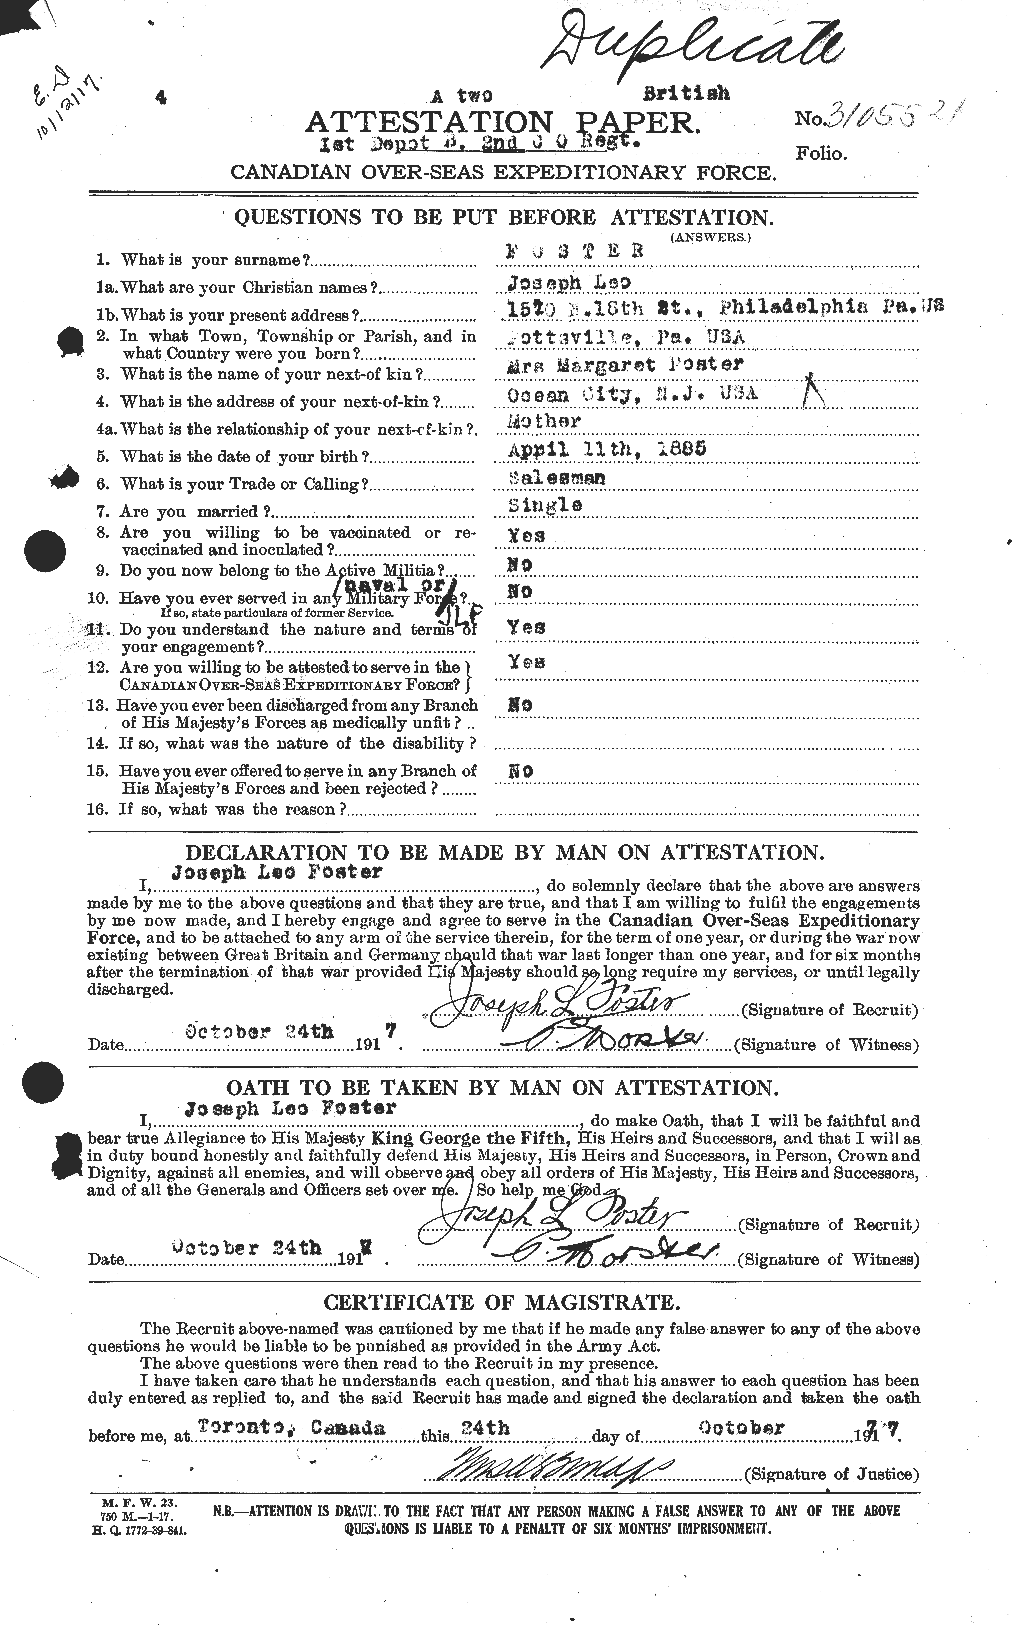 Personnel Records of the First World War - CEF 333390a